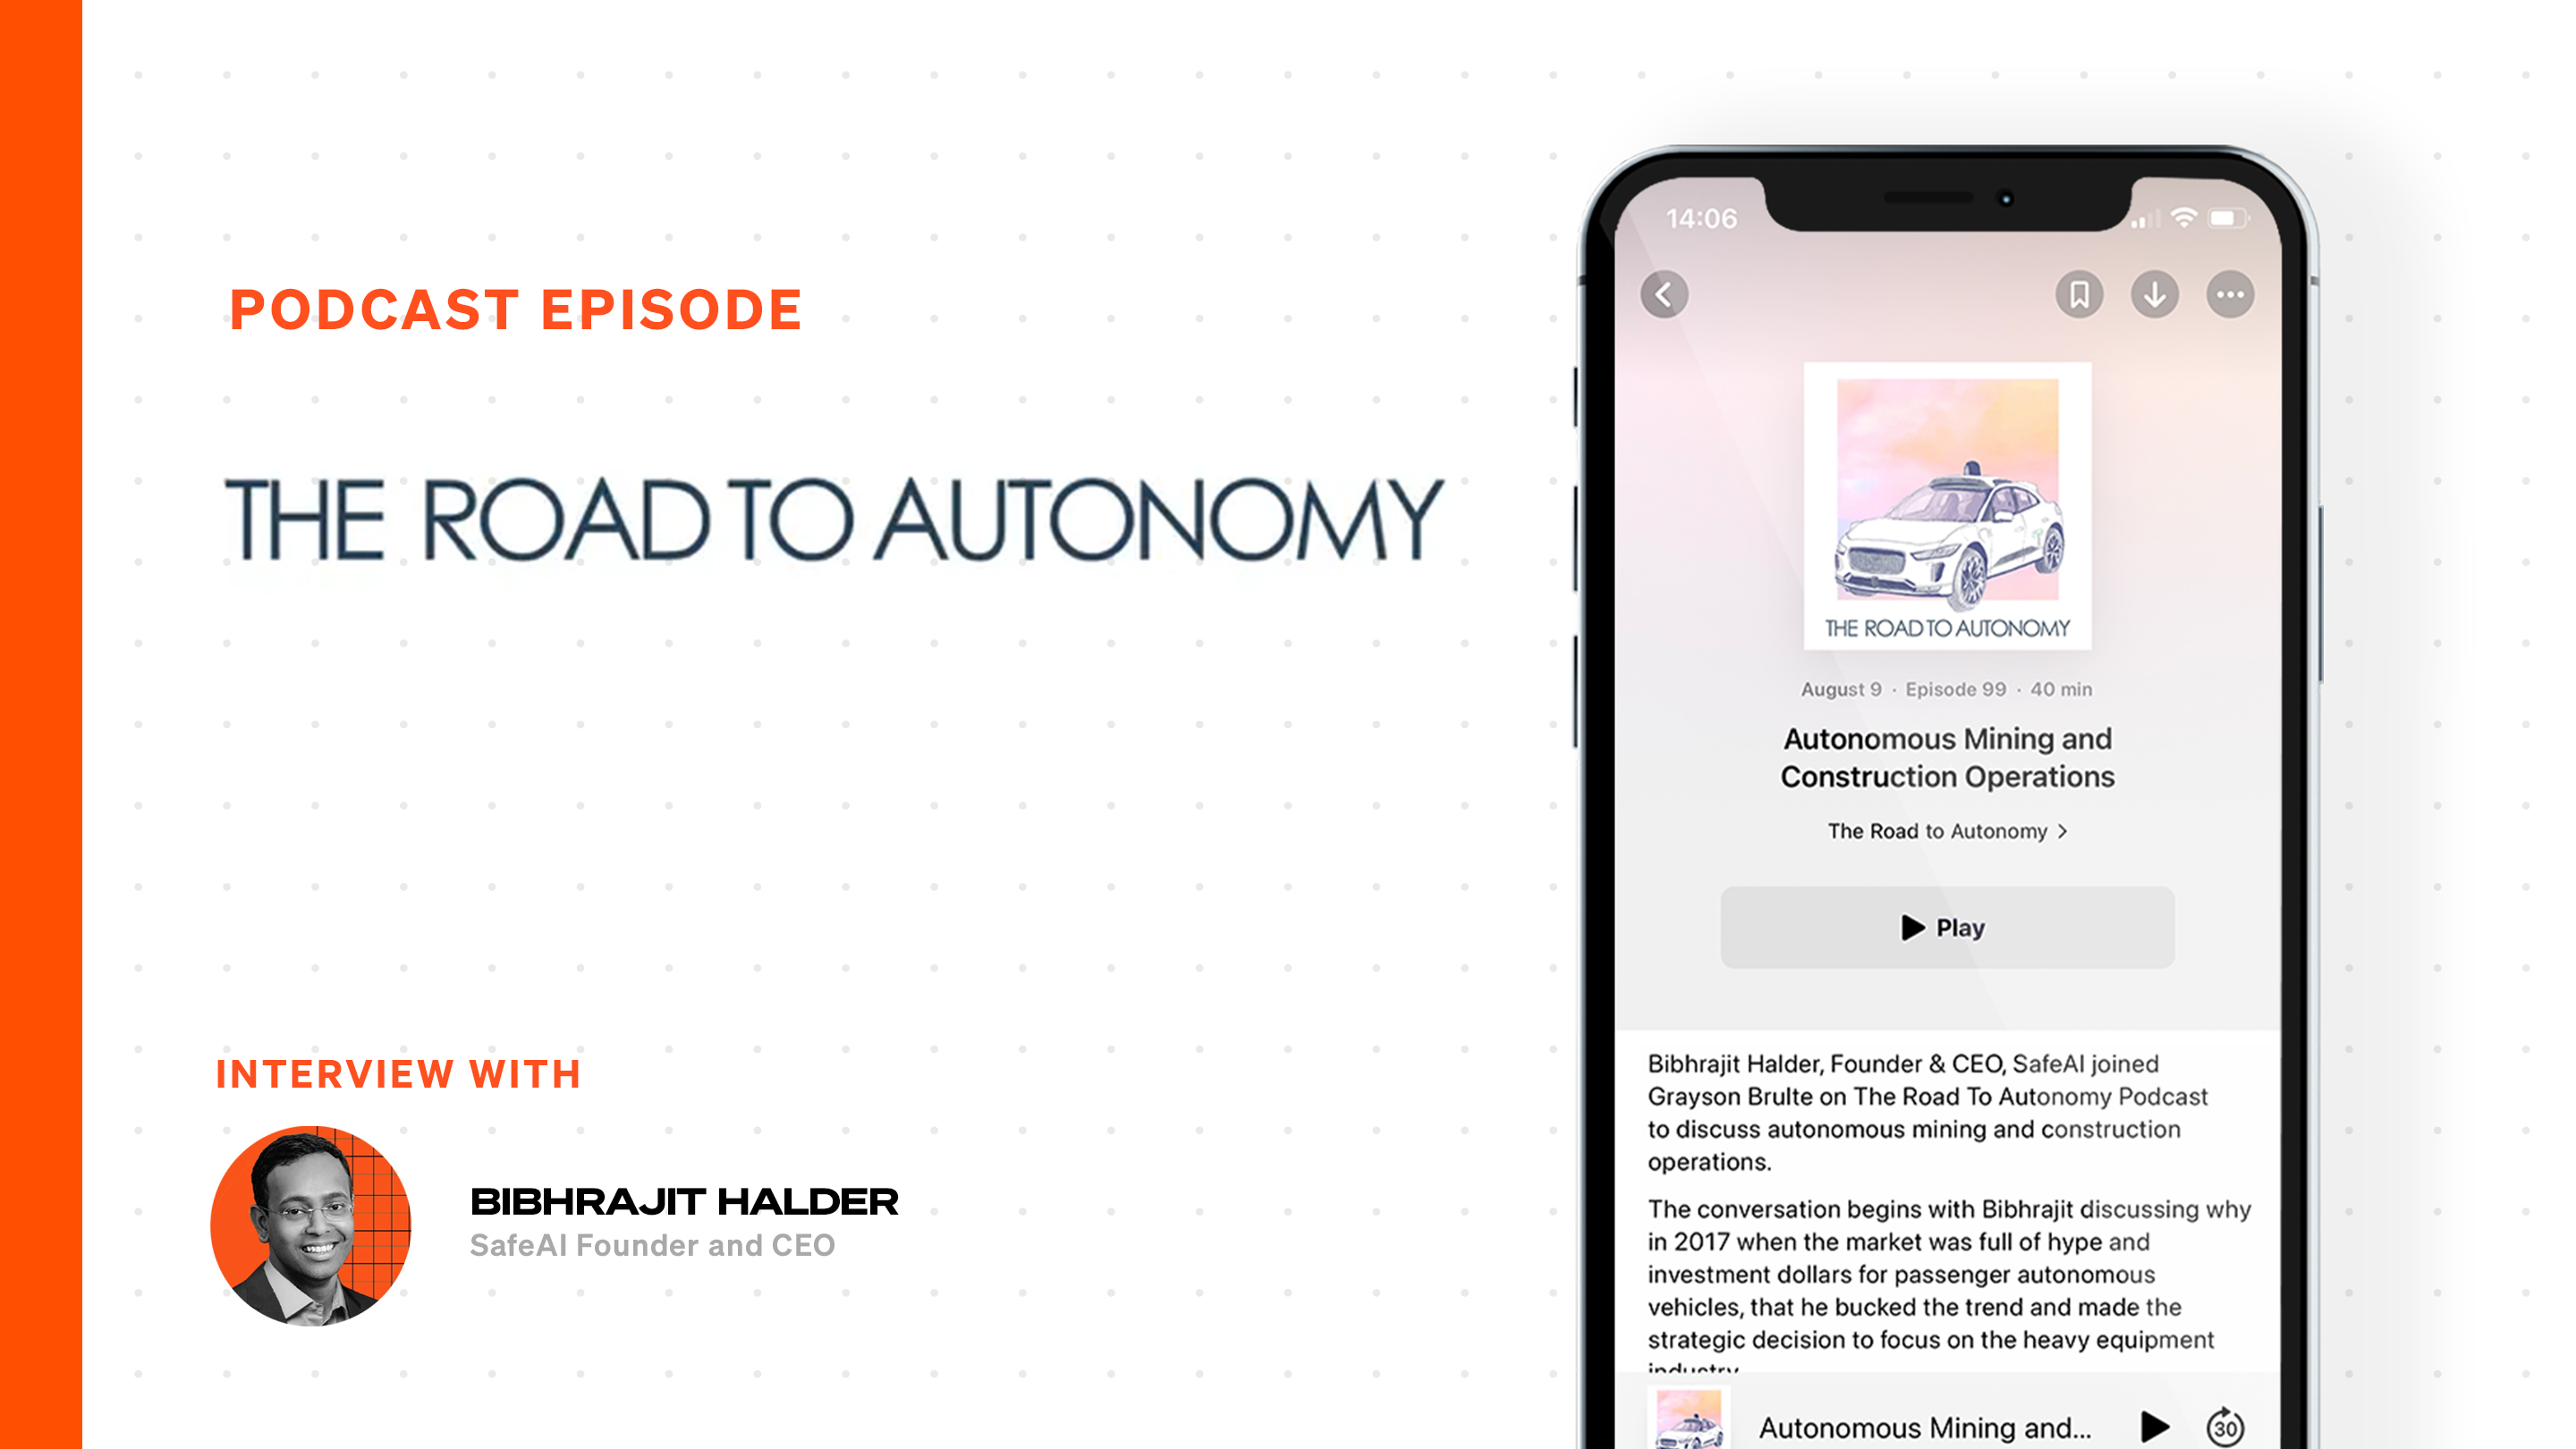 Autonomous Mining and Construction Operations on The Road To Autonomy Podcast